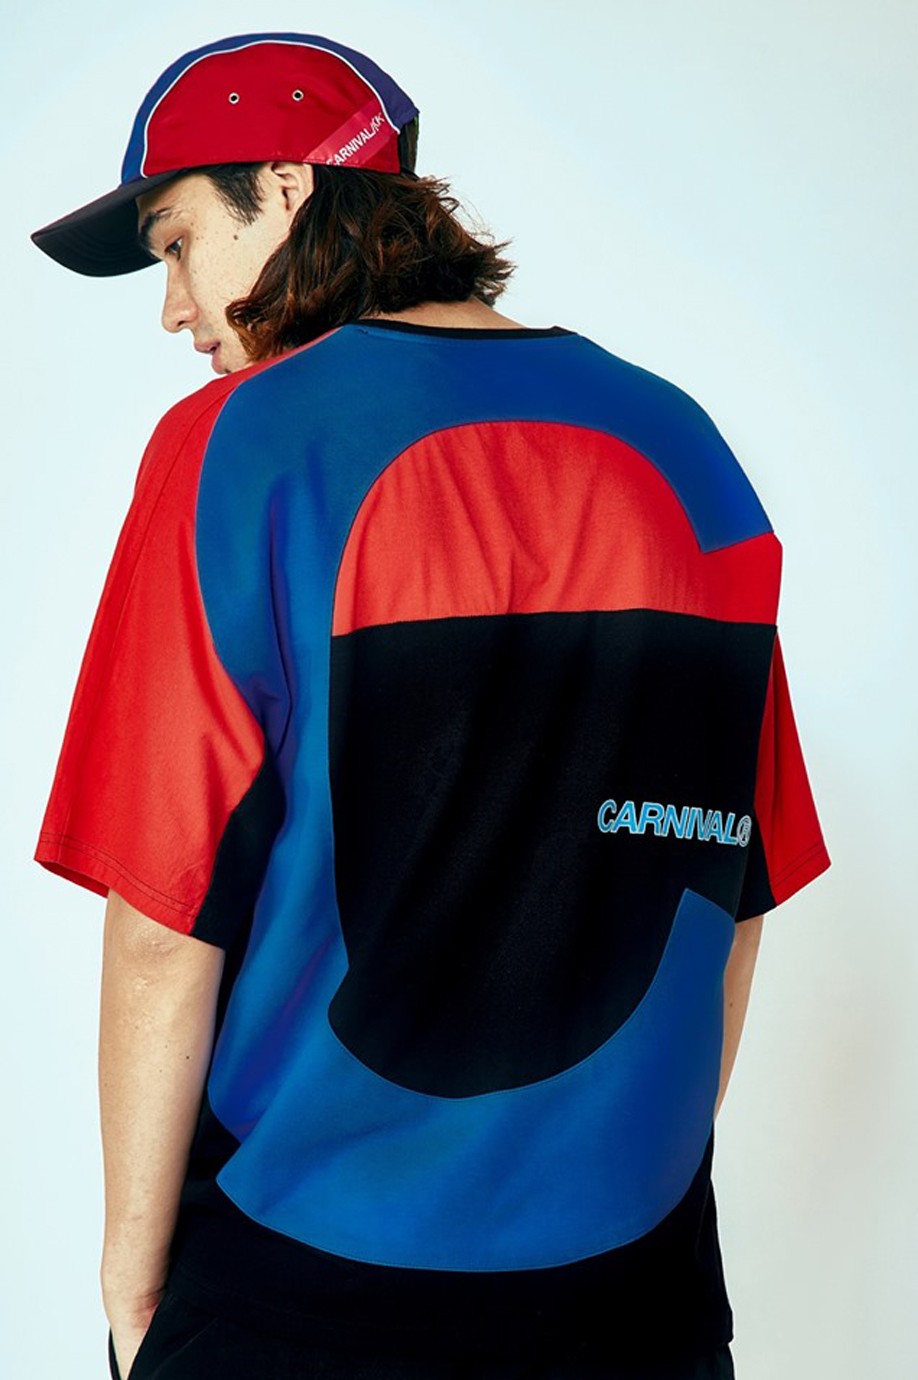 Chinese millennials embrace Supreme streetwear brand, and